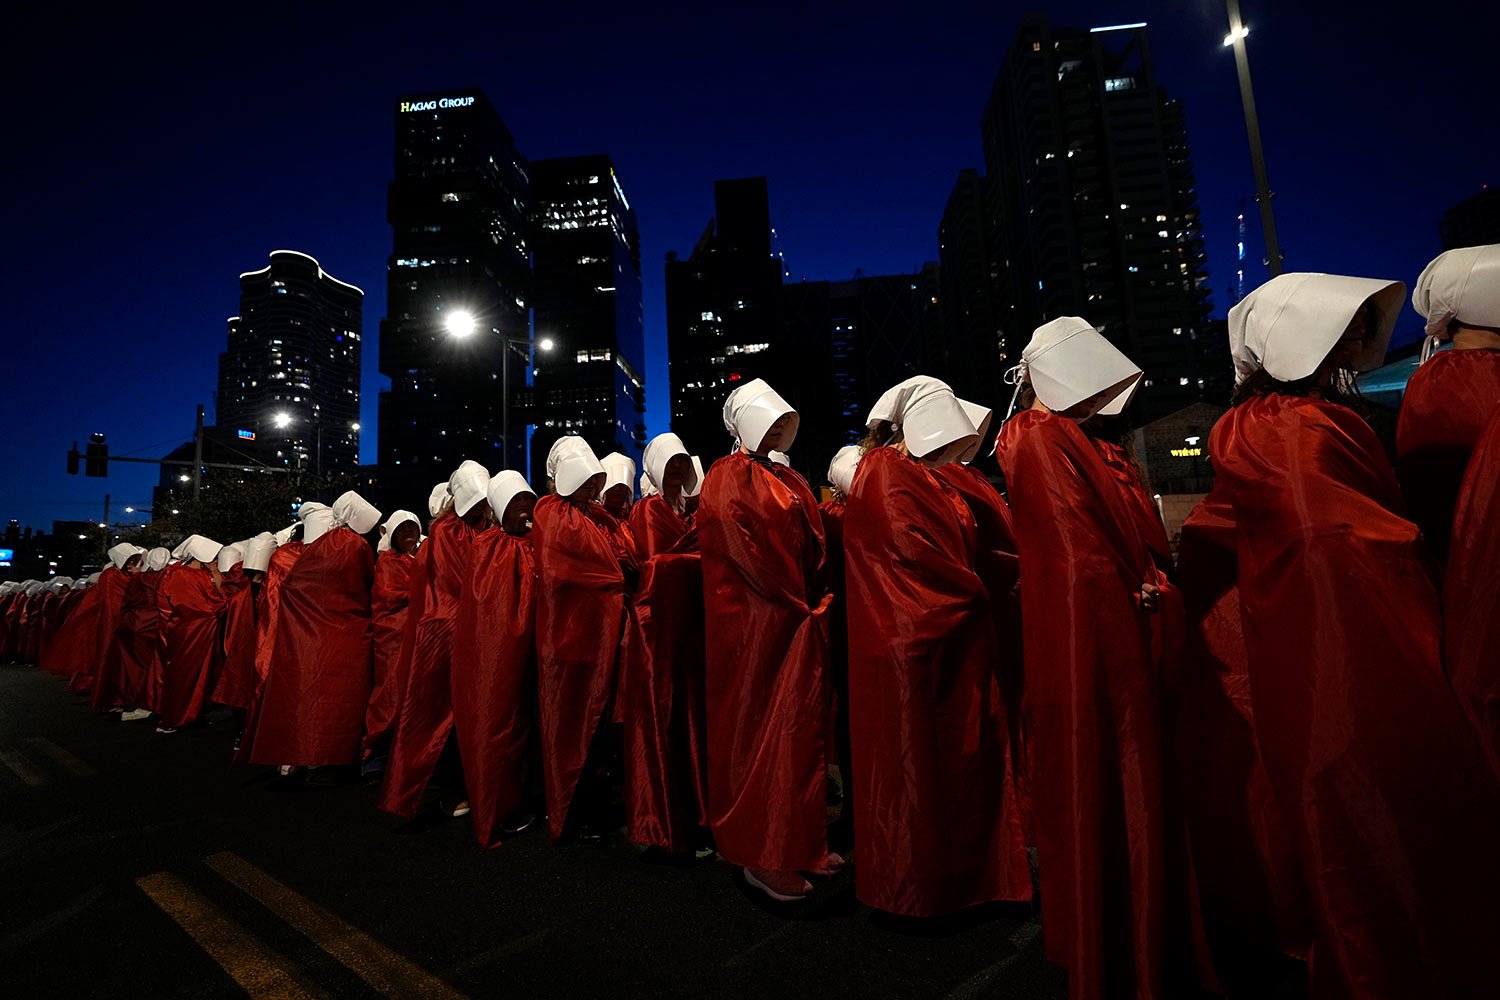  Israeli women's rights activists dressed as characters in the popular television series, "The Handmaid's Tale," protest plans by Prime Minister Benjamin Netanyahu's government to overhaul the judicial system, in Tel Aviv, Israel, Saturday, March 11,